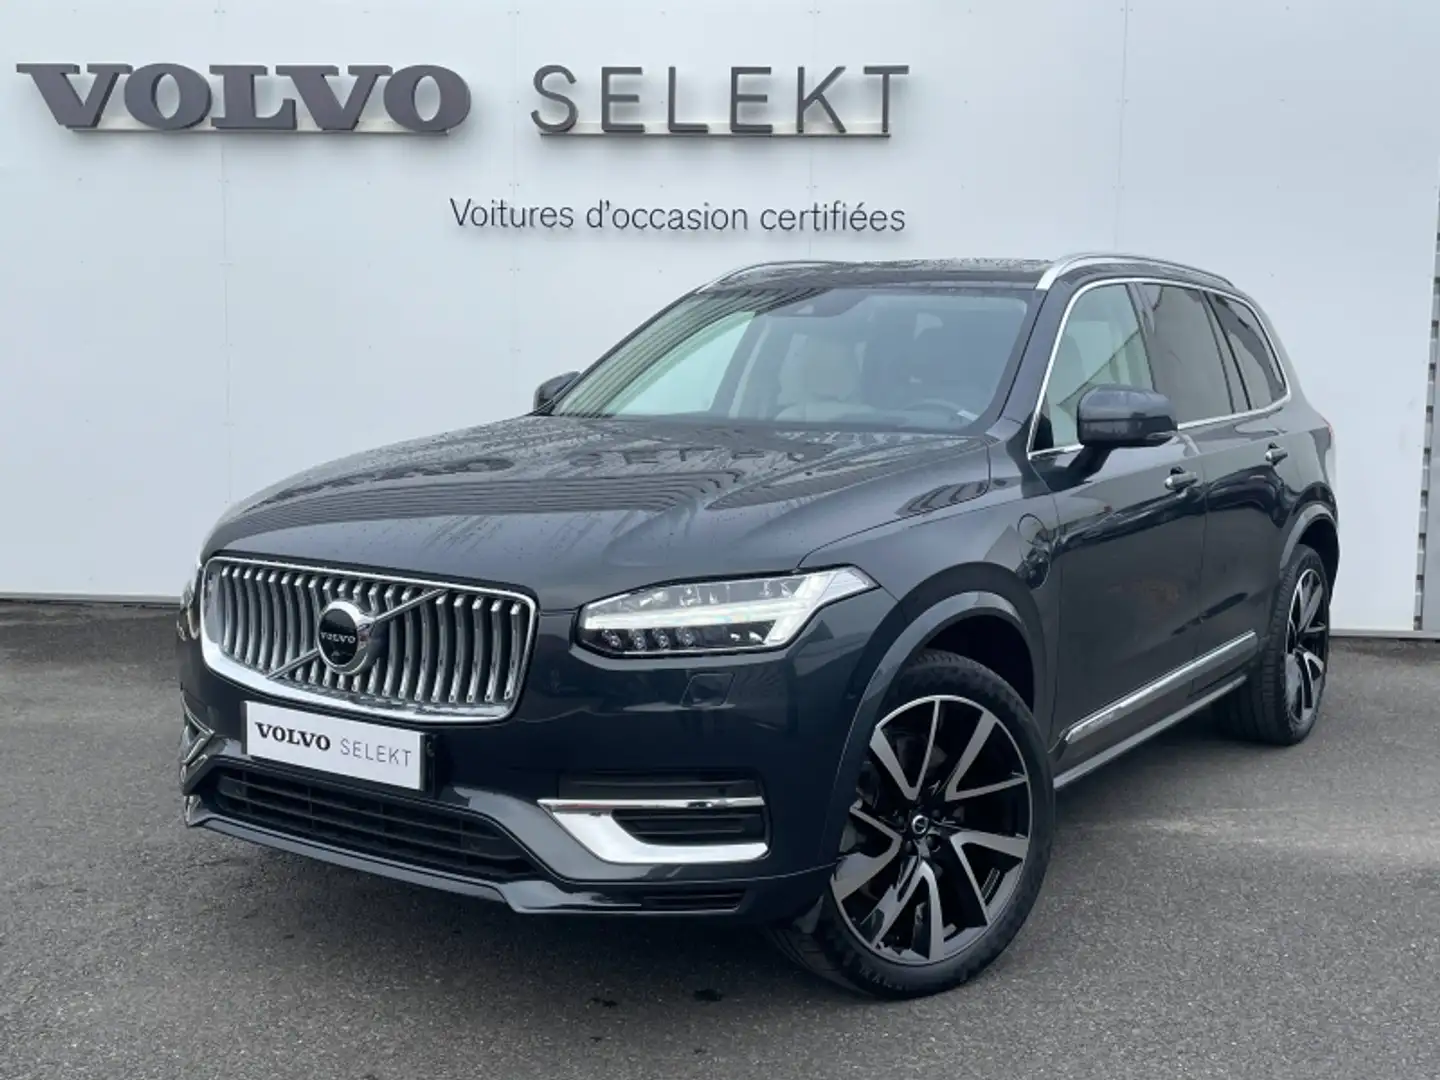 Volvo XC90 T8 AWD 303 + 87ch Inscription Luxe Geartronic - 1